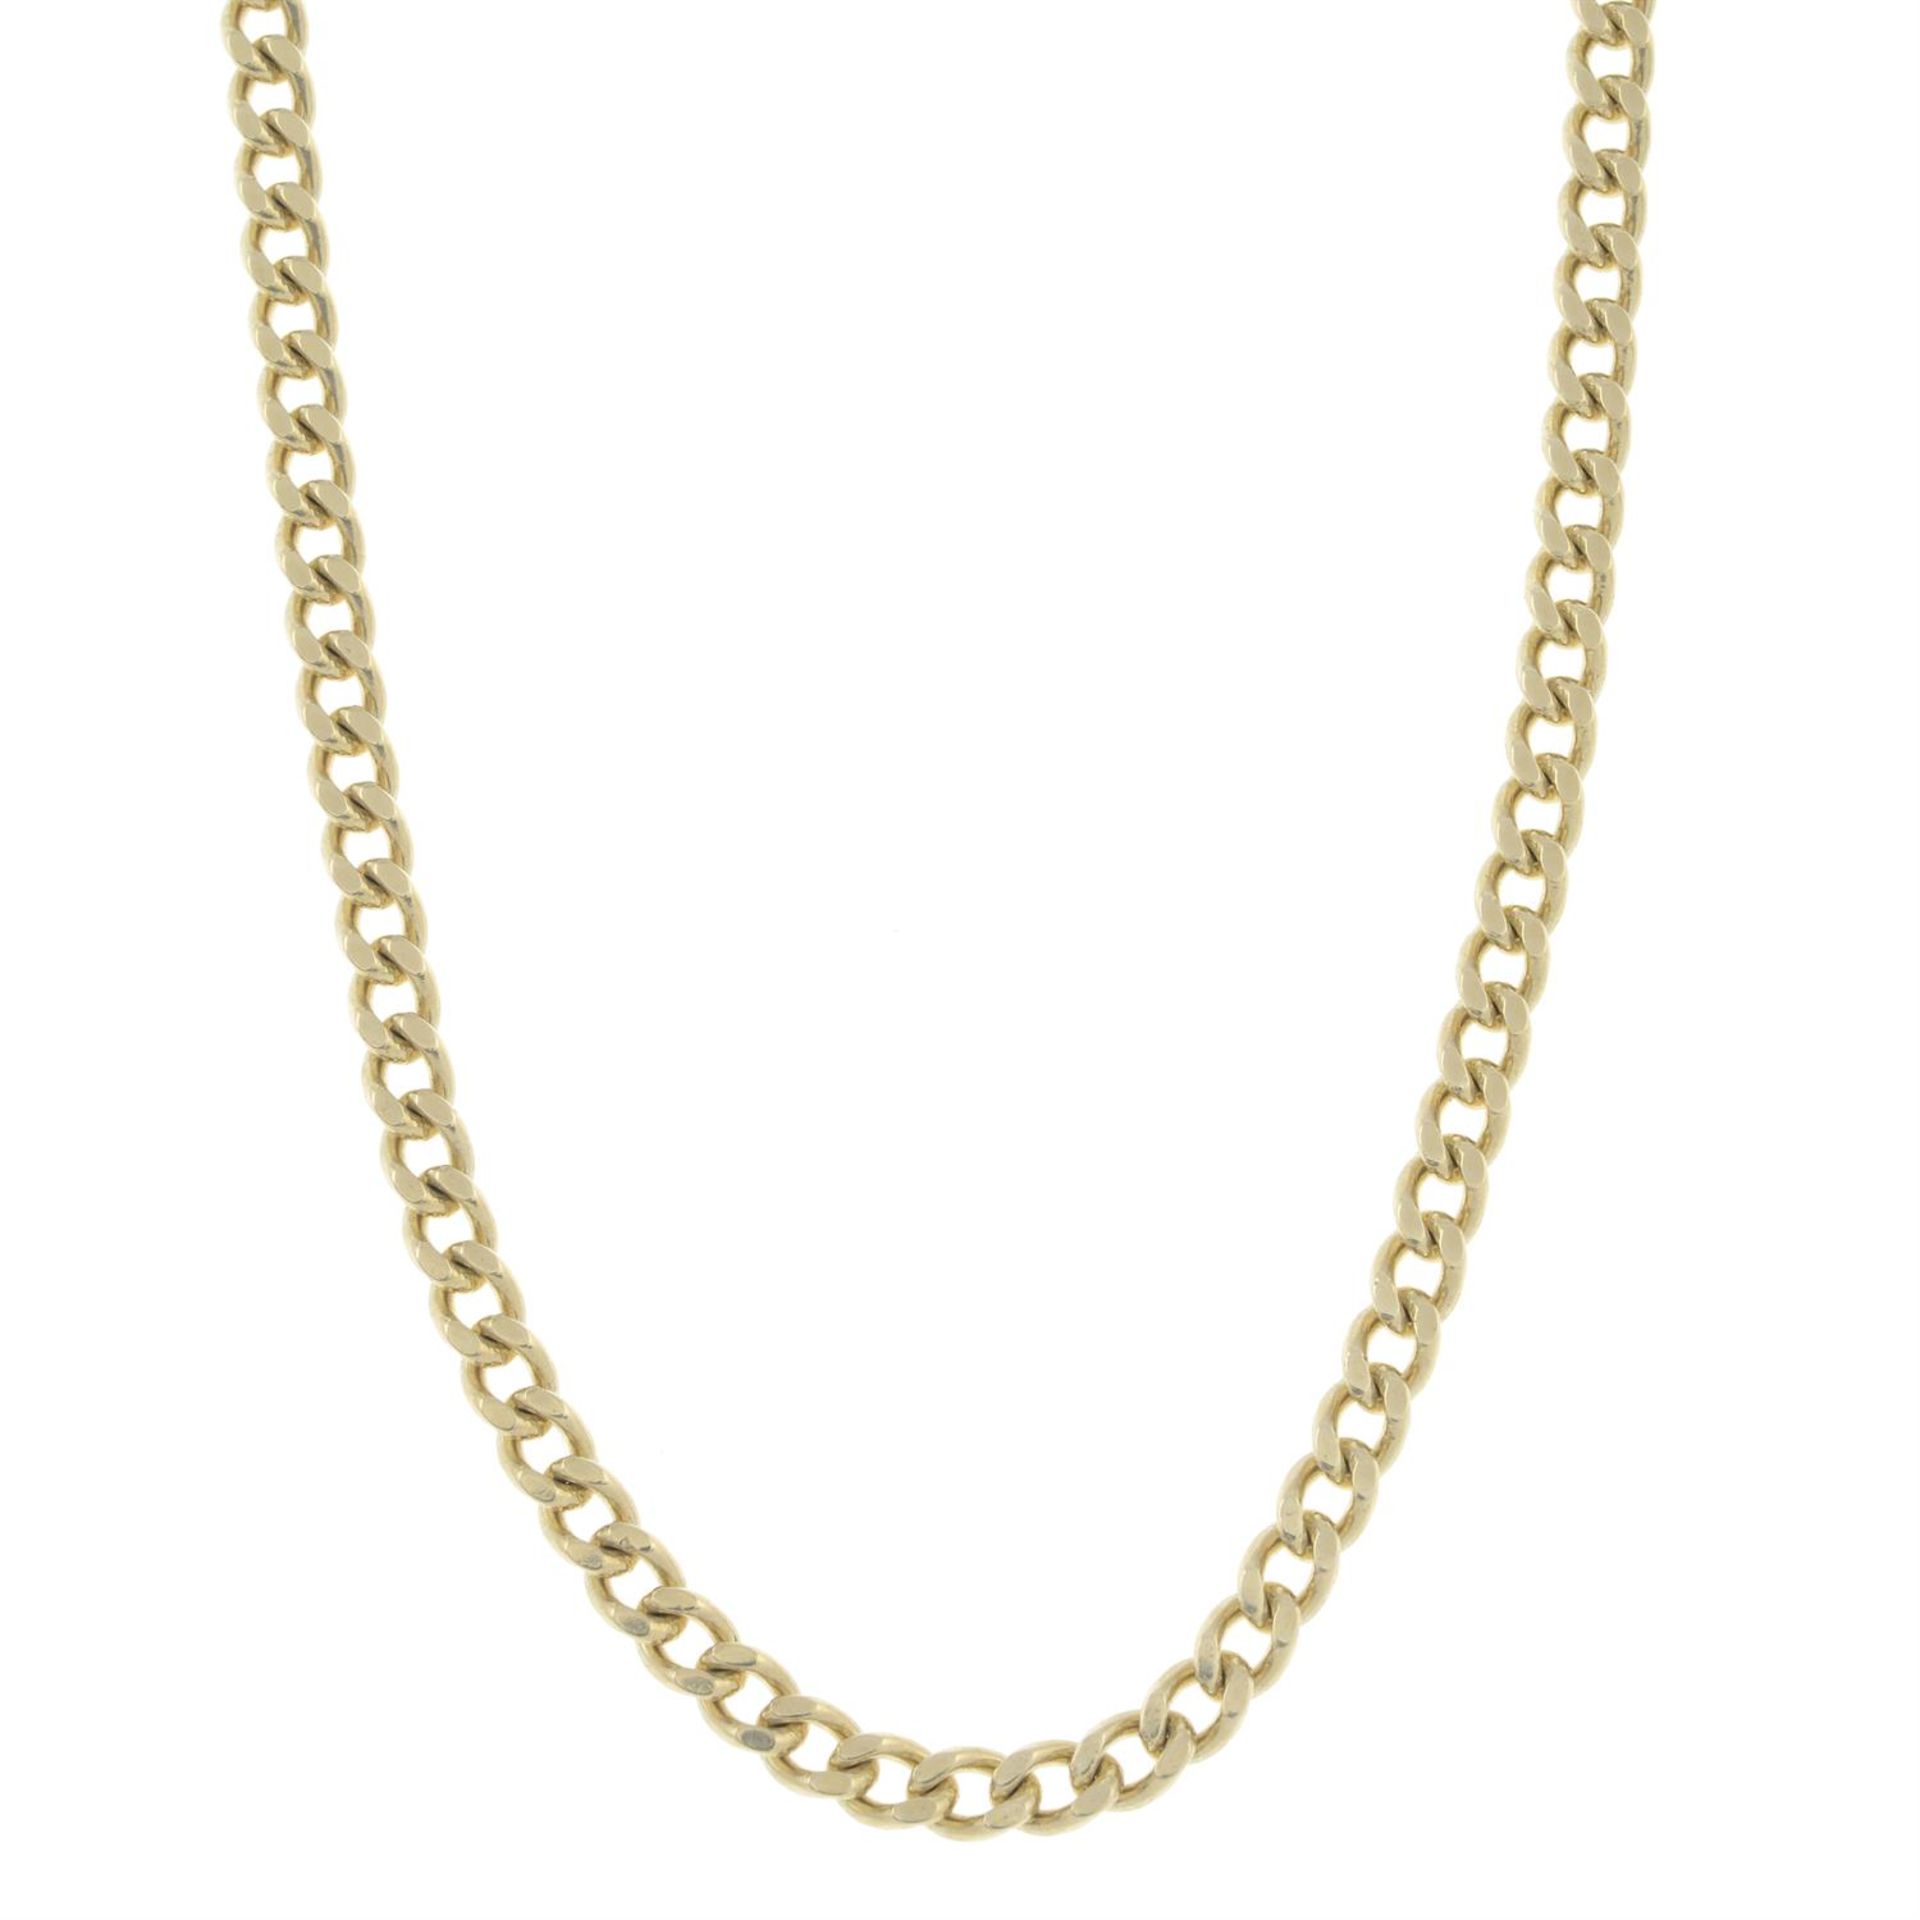 A 9ct bicolour gold figaro-link necklace.